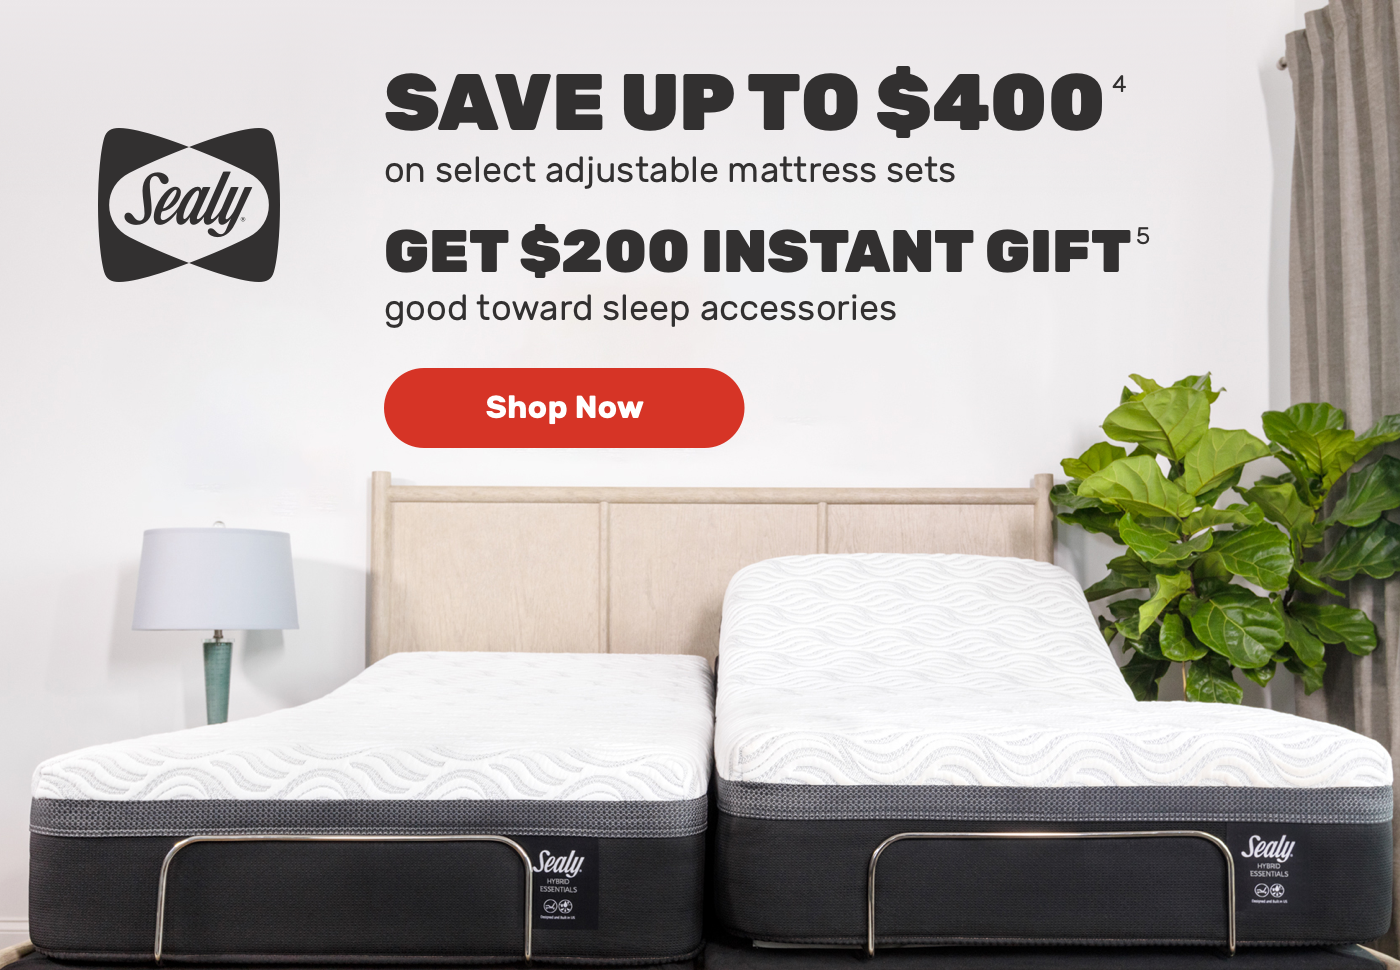 save upto $400 on selected adjustable mattress sets get $200 instant gift good towards sleep accessories.Shop Now